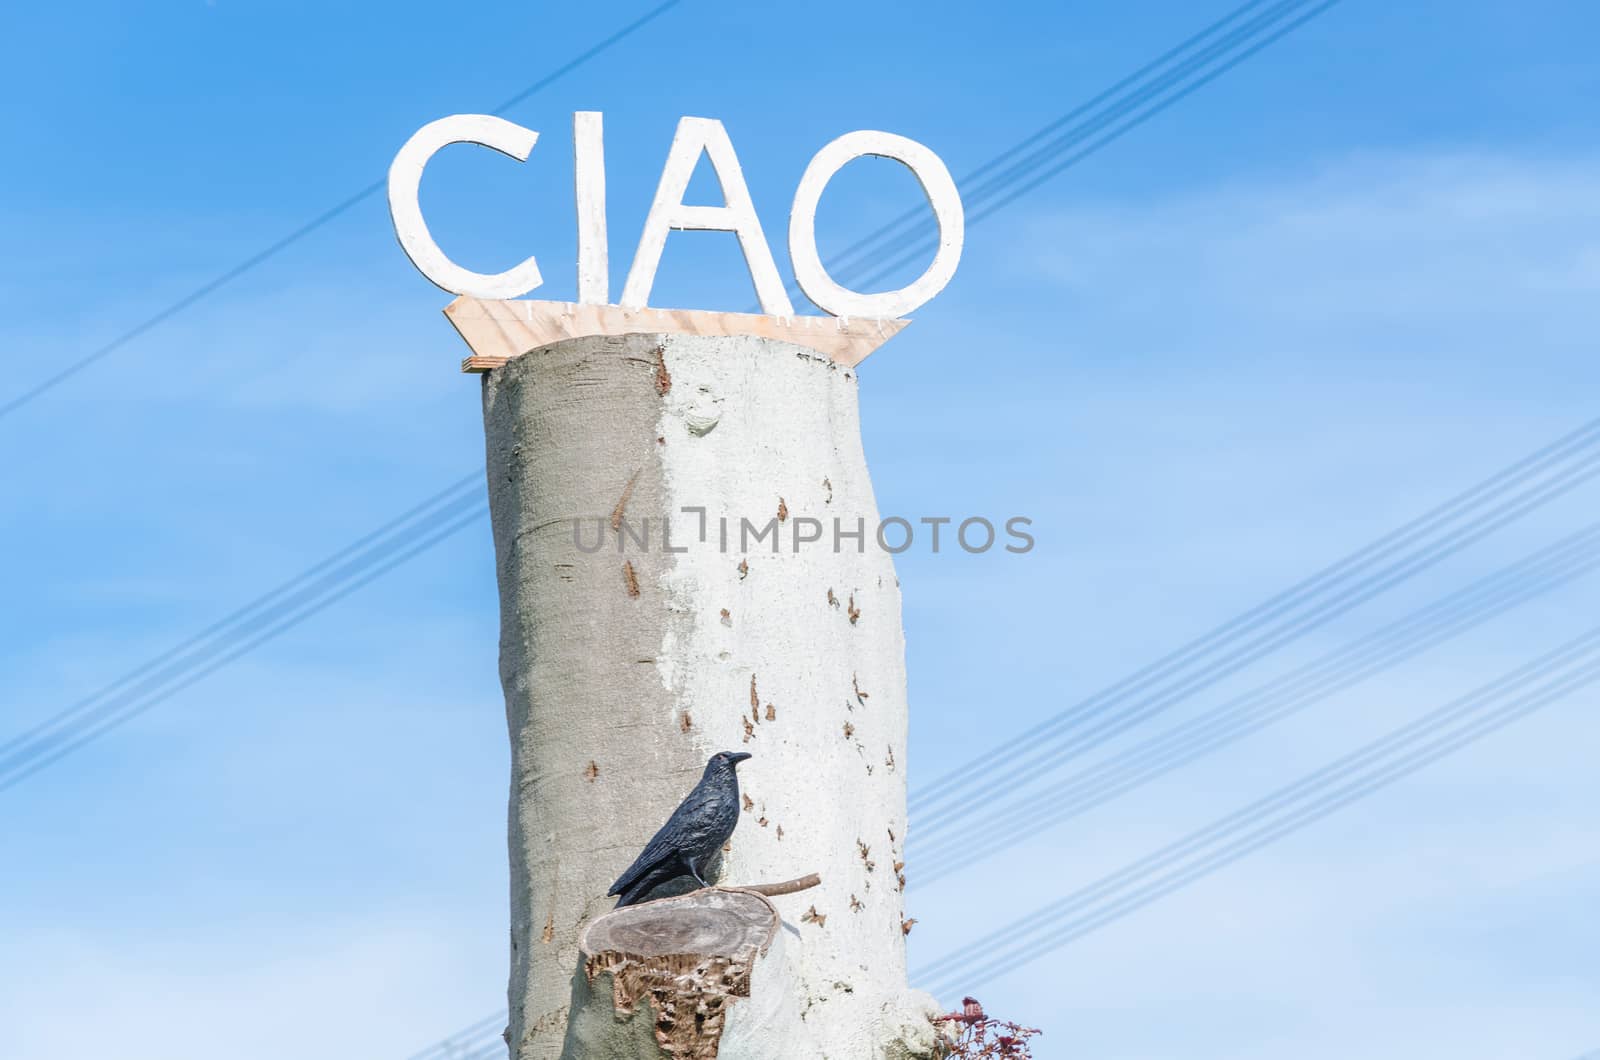 Ciao on tree trunk by JFsPic